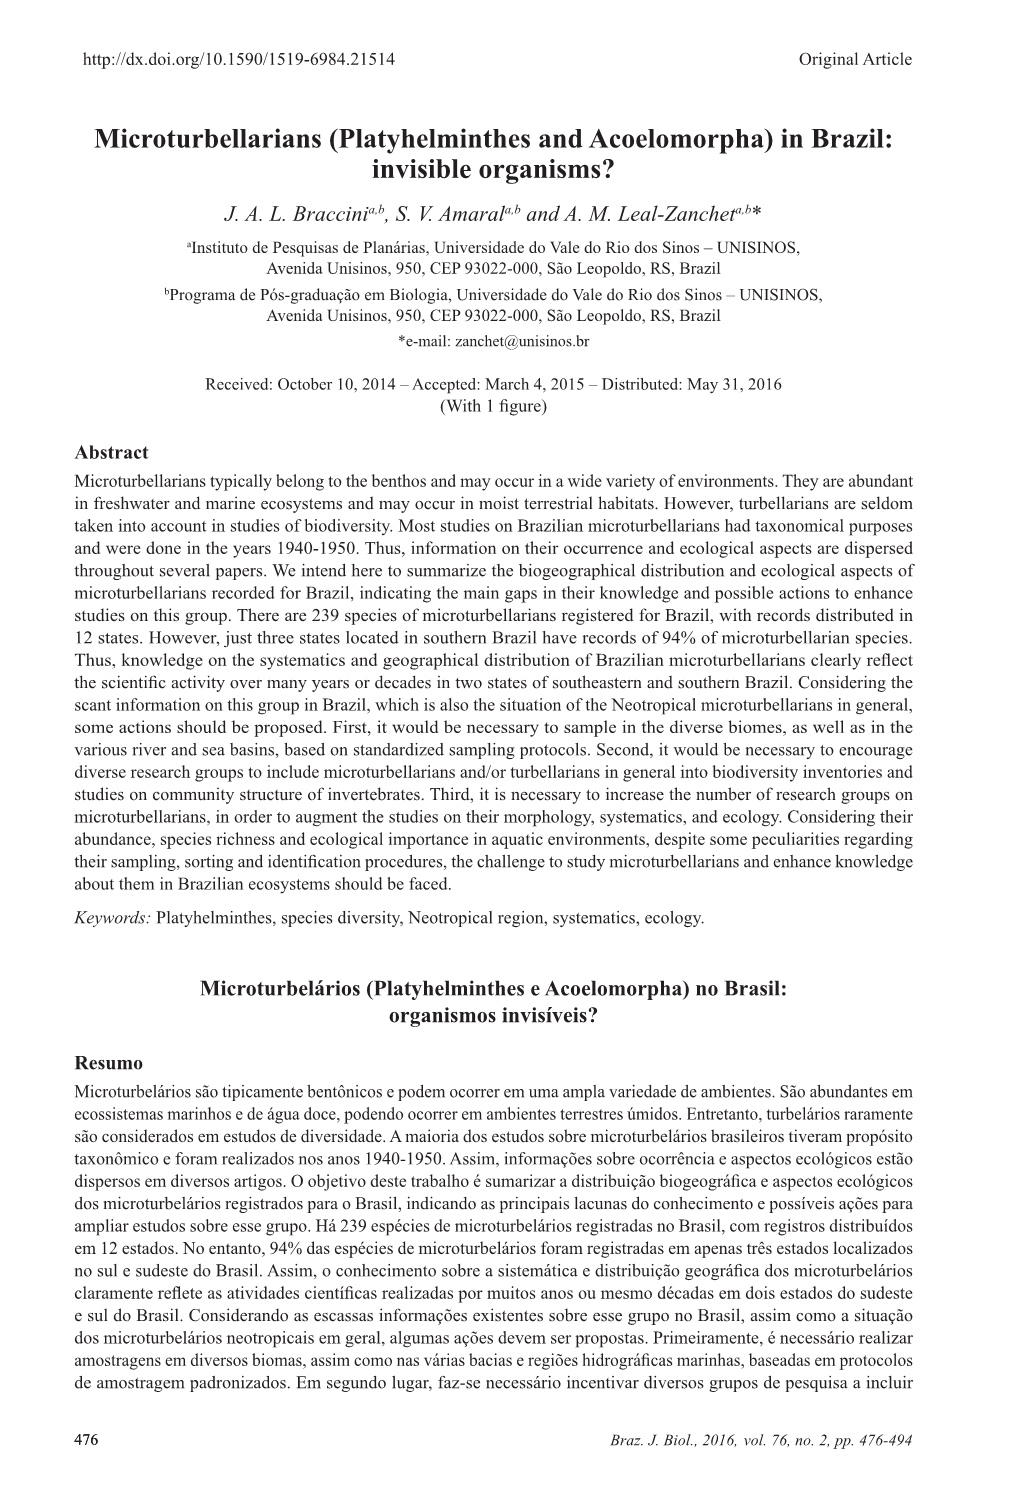 Microturbellarians (Platyhelminthes and Acoelomorpha) in Brazil: Invisible Organisms? J